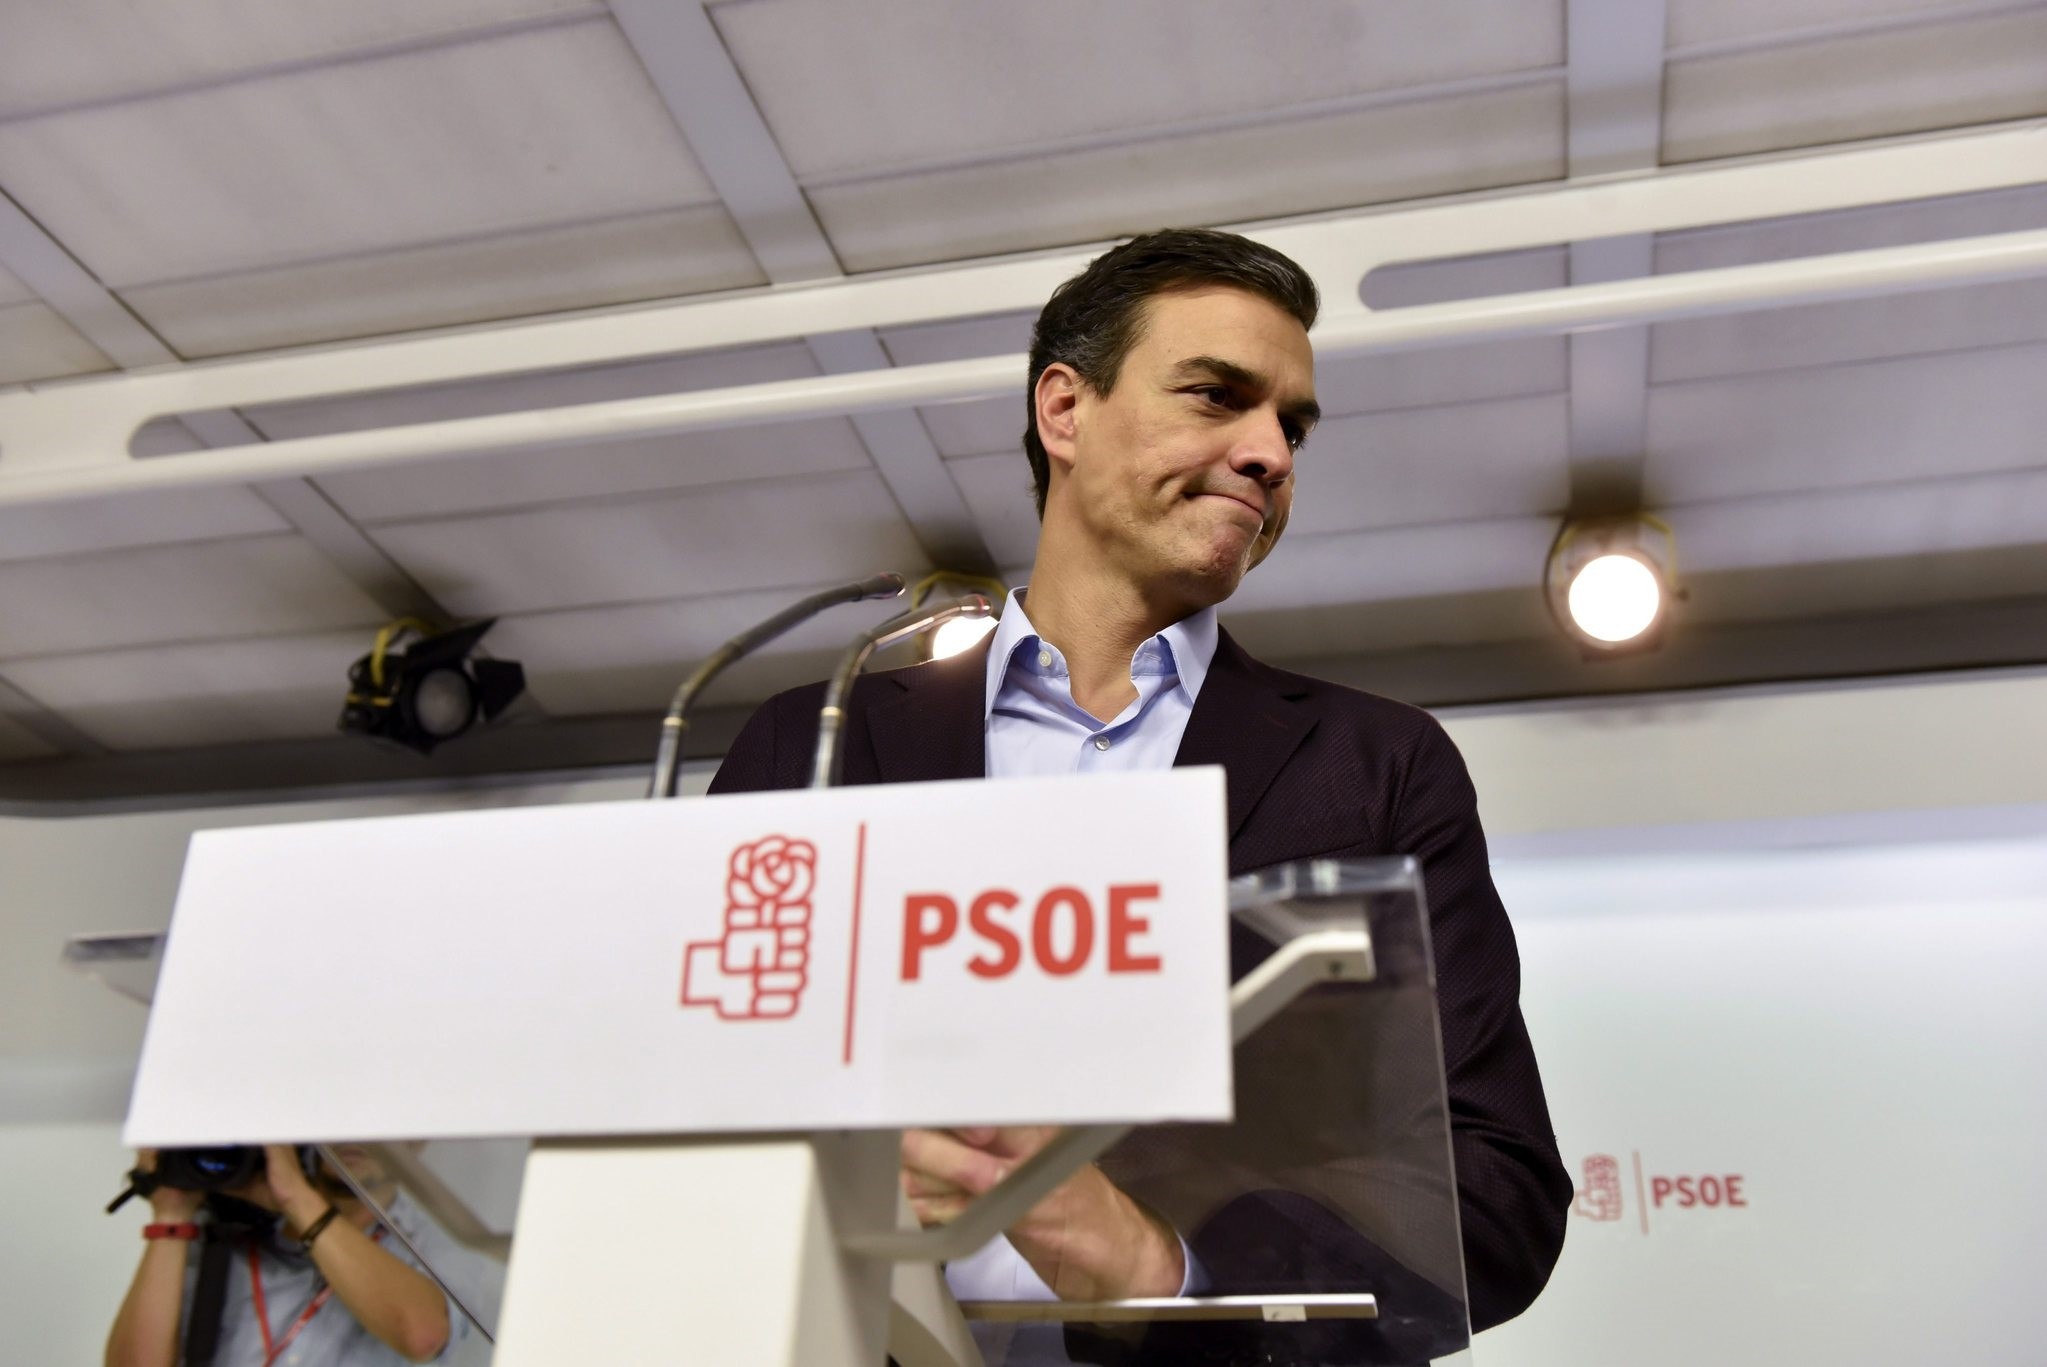 Socialist Party (PSOE) leader, Pedro Sanchez, speaks during a press conference in Madrid, Spain, 01 October 2016. (EPA Photo)